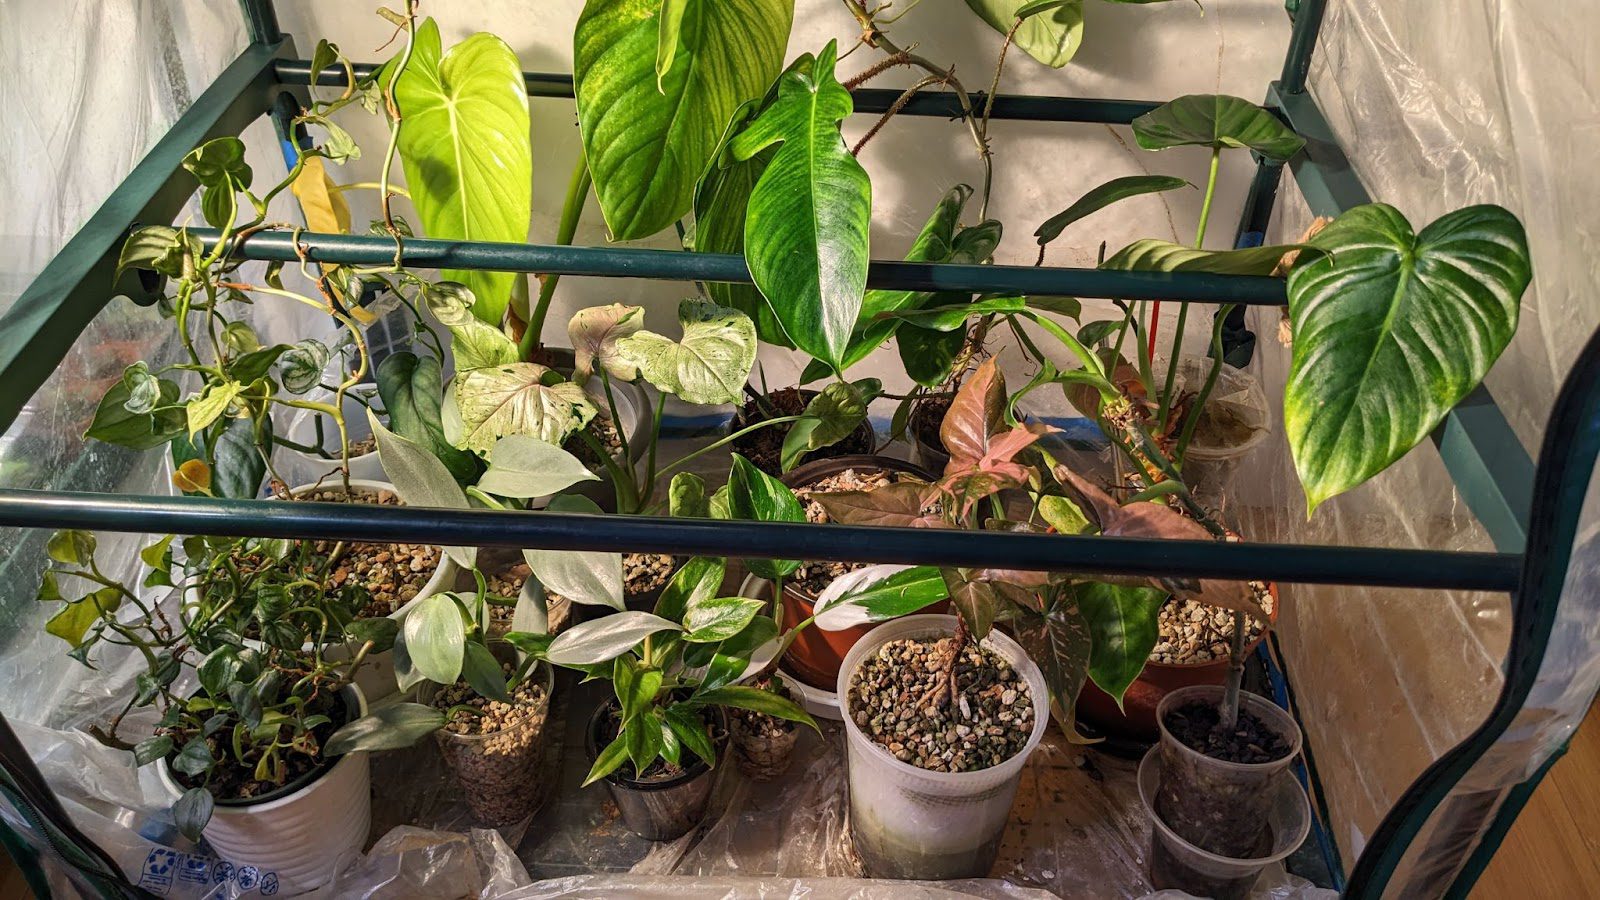 How To Make An Easy DIY Indoor Greenhouse (On Amazon)